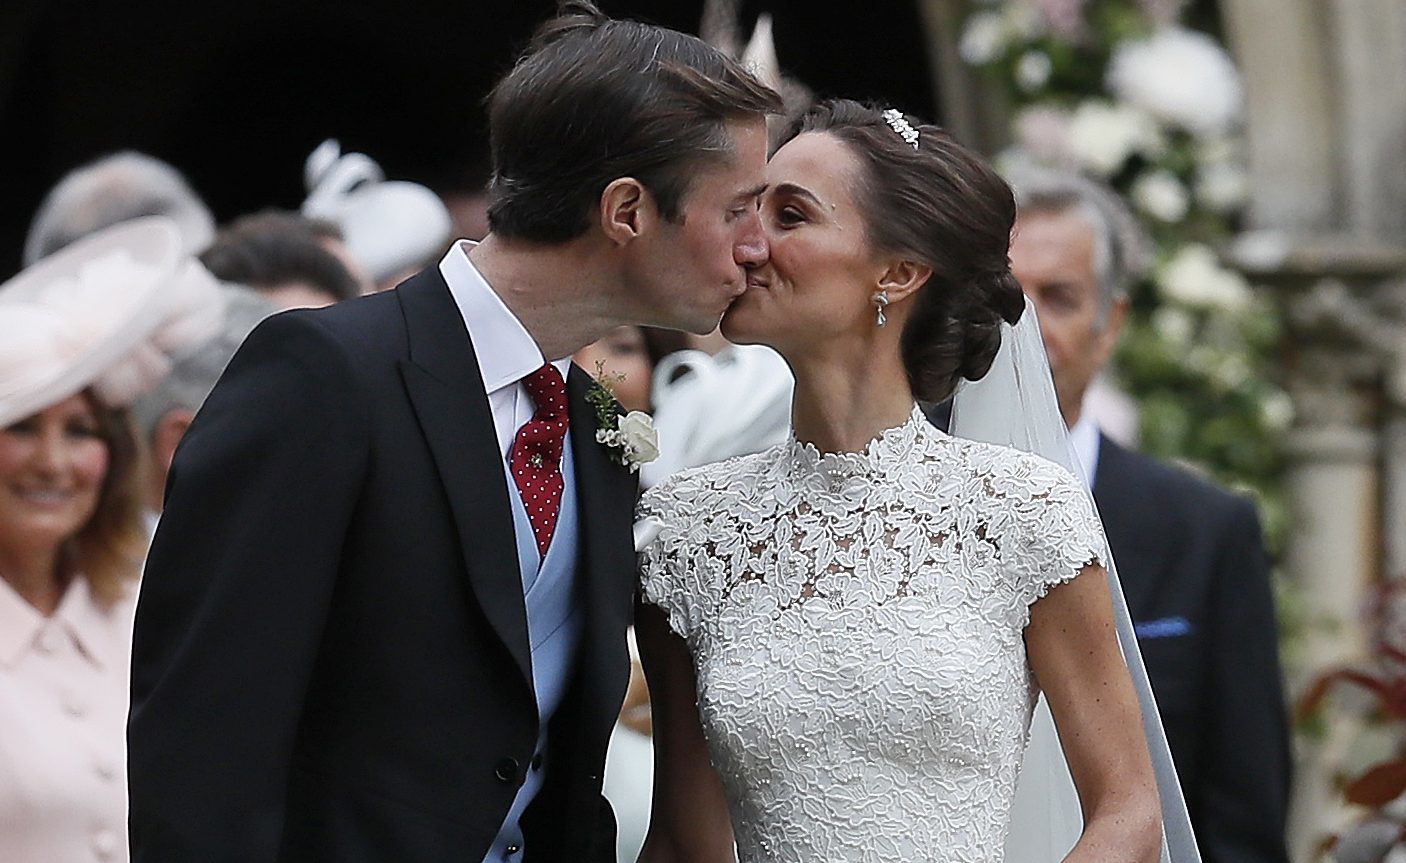 Pippa Middleton and James Matthews kiss after their wedding at St Mark's Church (Kirsty Wigglesworth - Pool/Getty Images)